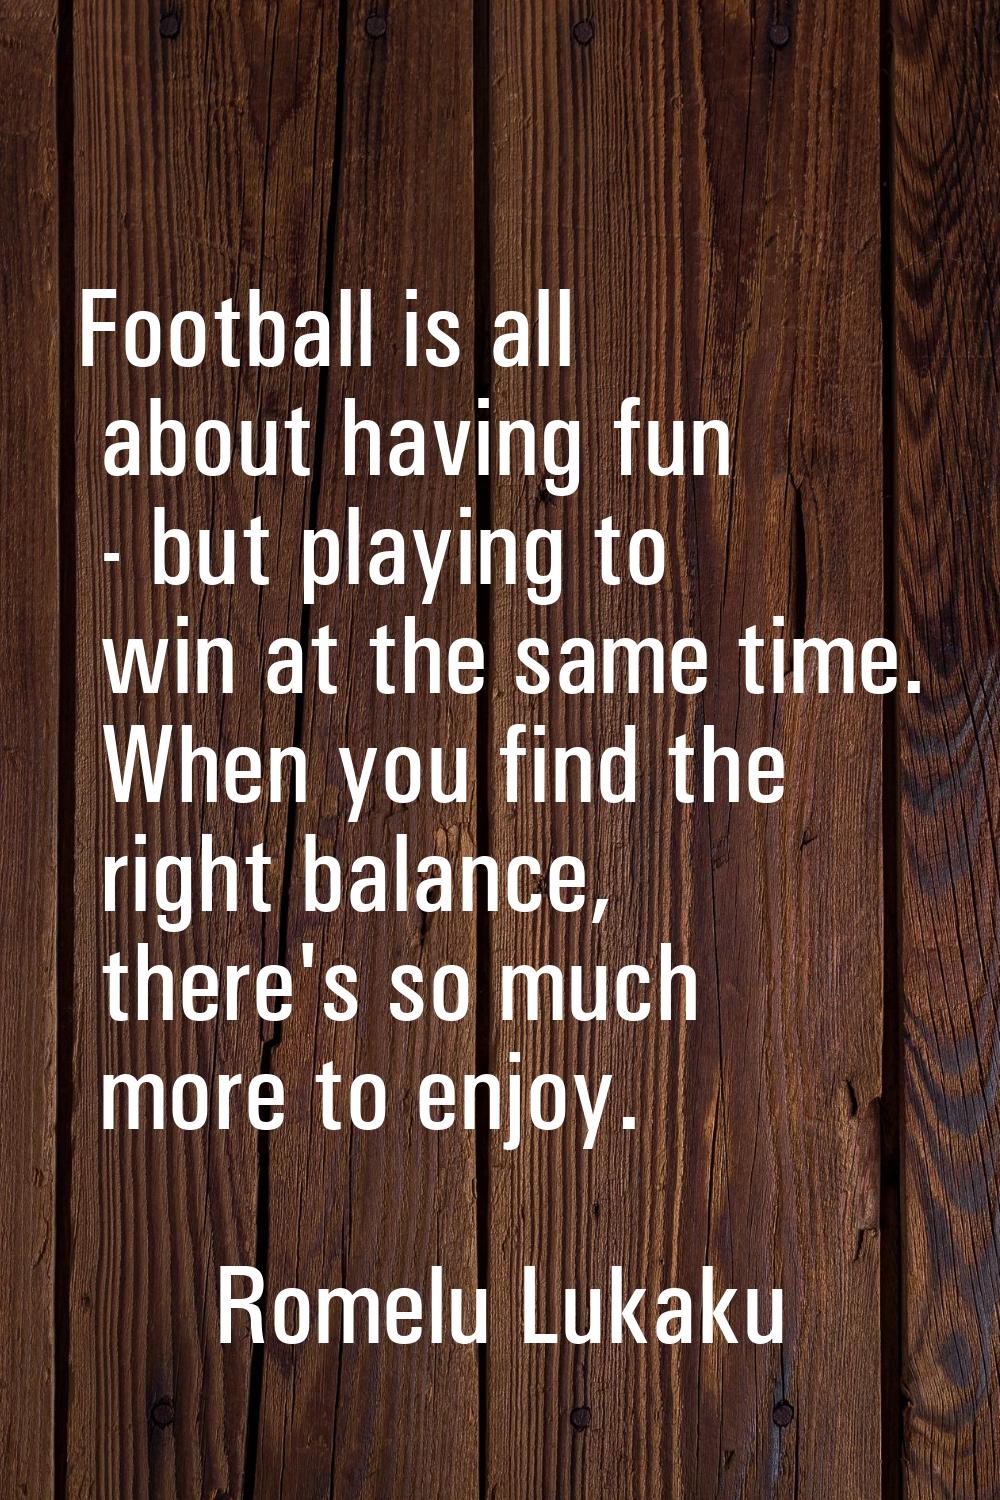 Football is all about having fun - but playing to win at the same time. When you find the right bal